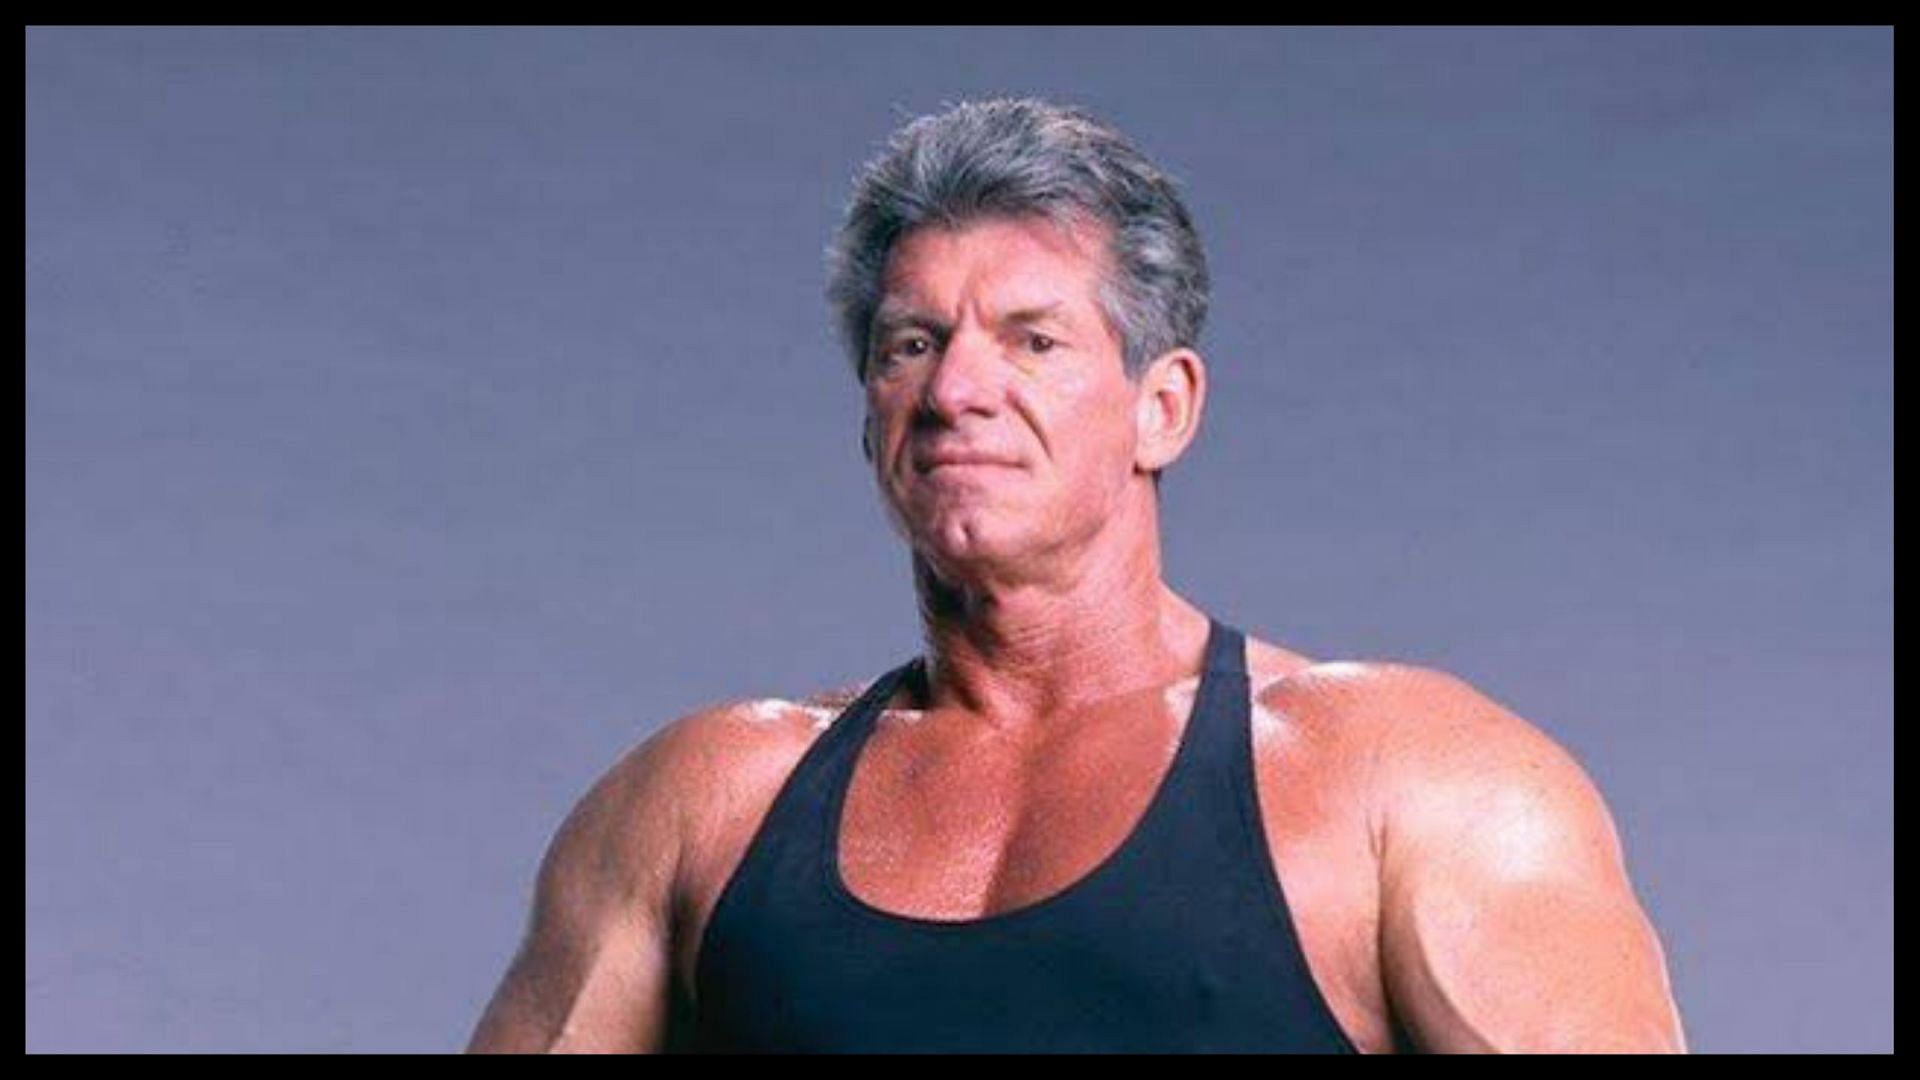 Vince McMahon has locked horns in the squared circle multiple times.